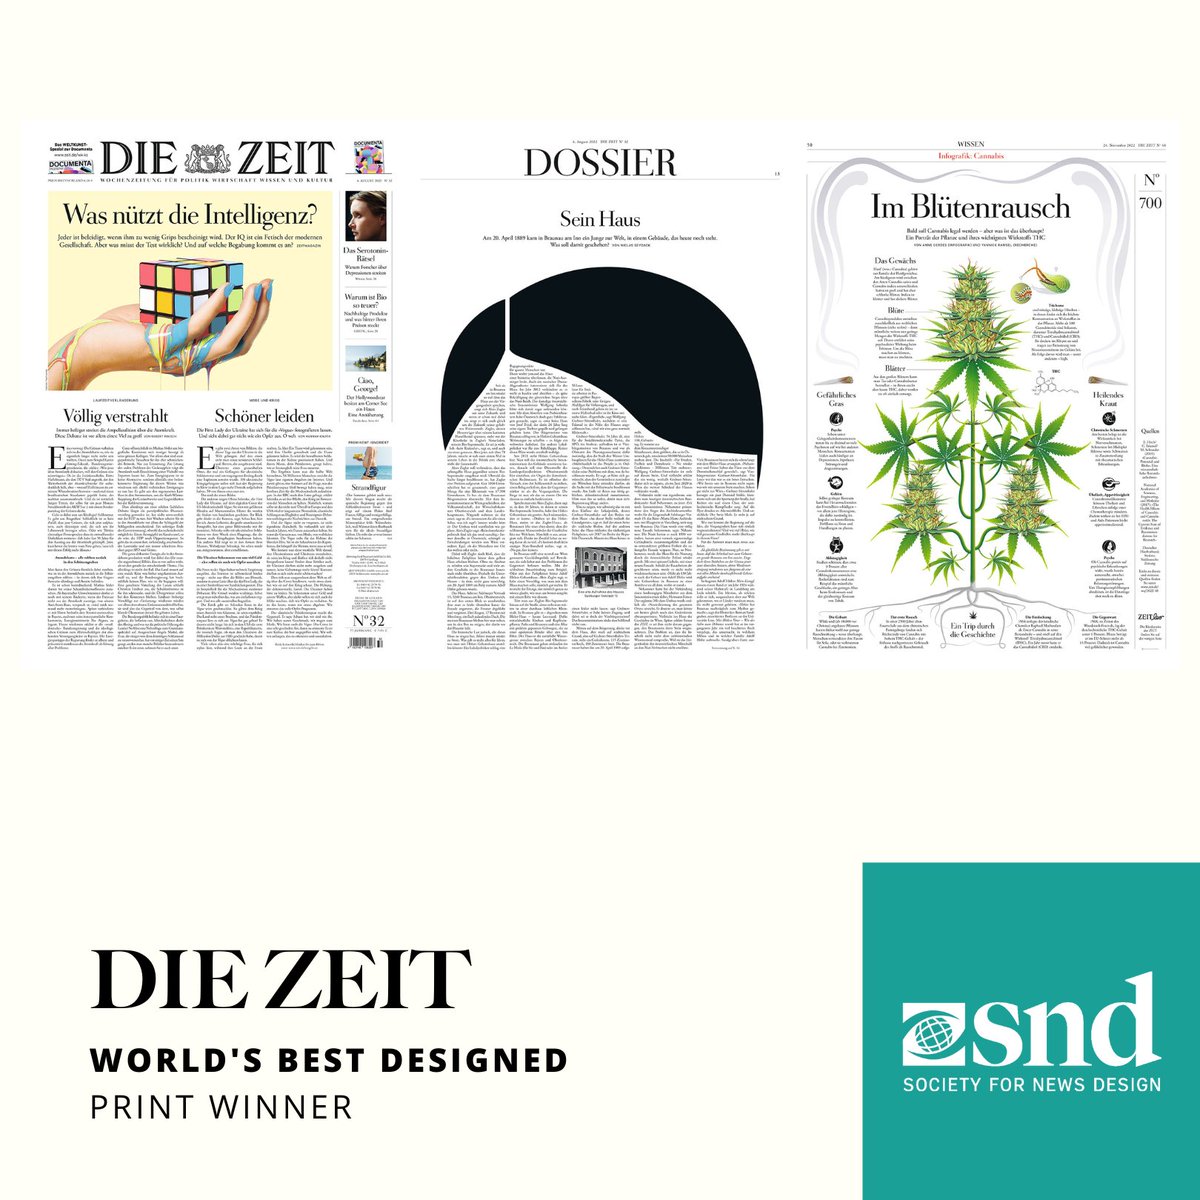 🏆 Congratulations to @DIEZEIT on being named World's Best Designed Newspaper in the Best of Print News Design competition. #SND44